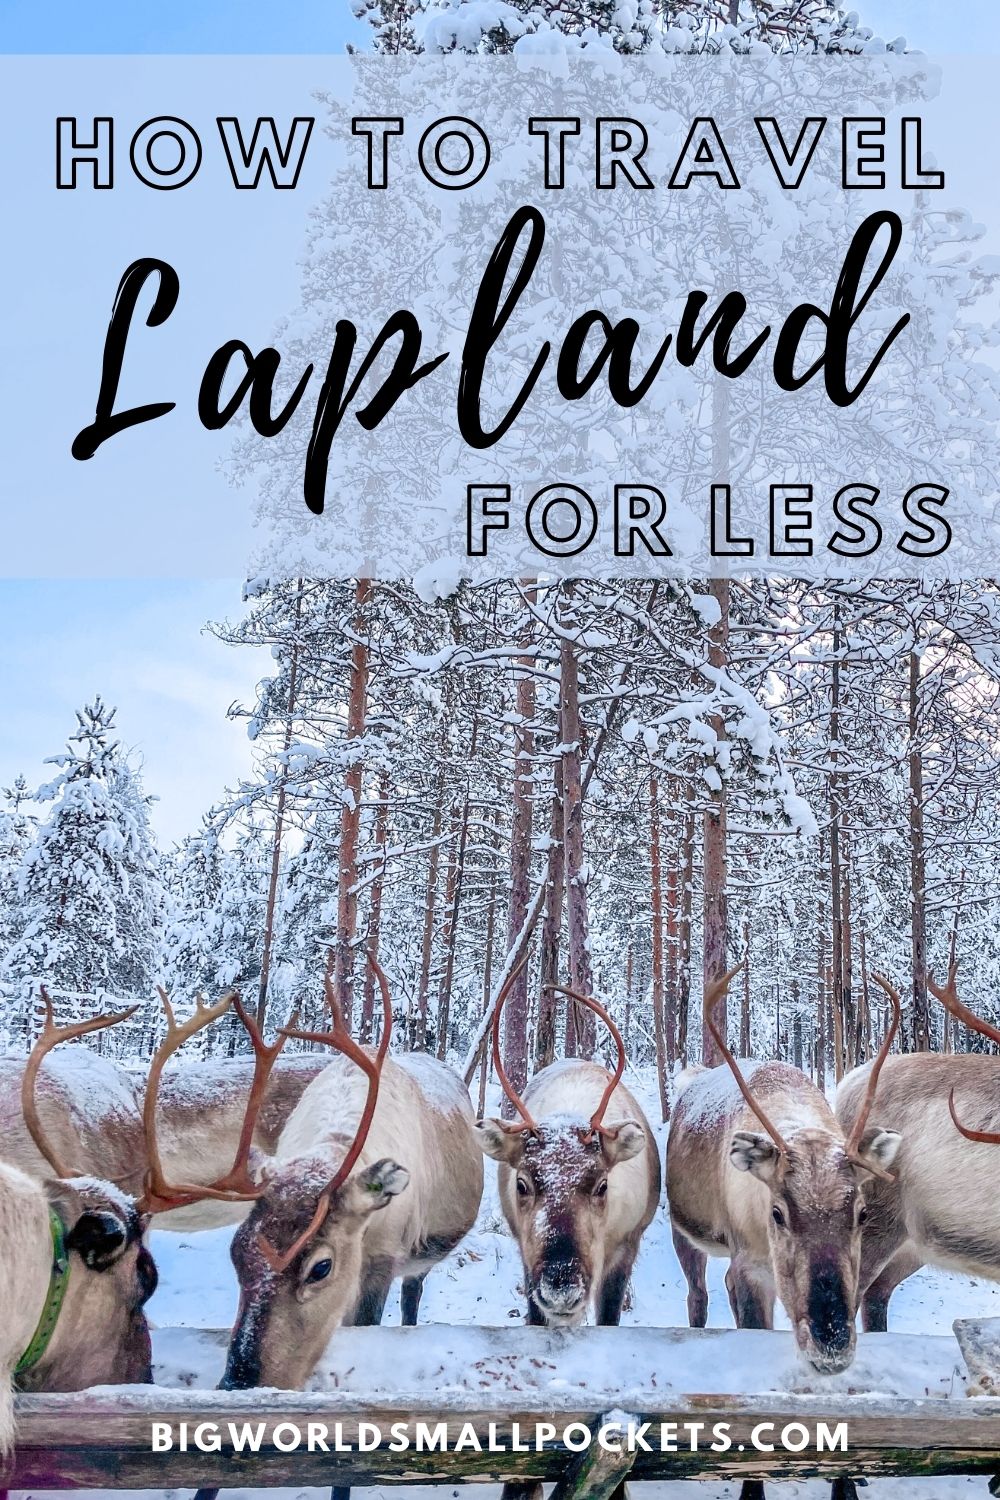 How to Travel Lapland for Less